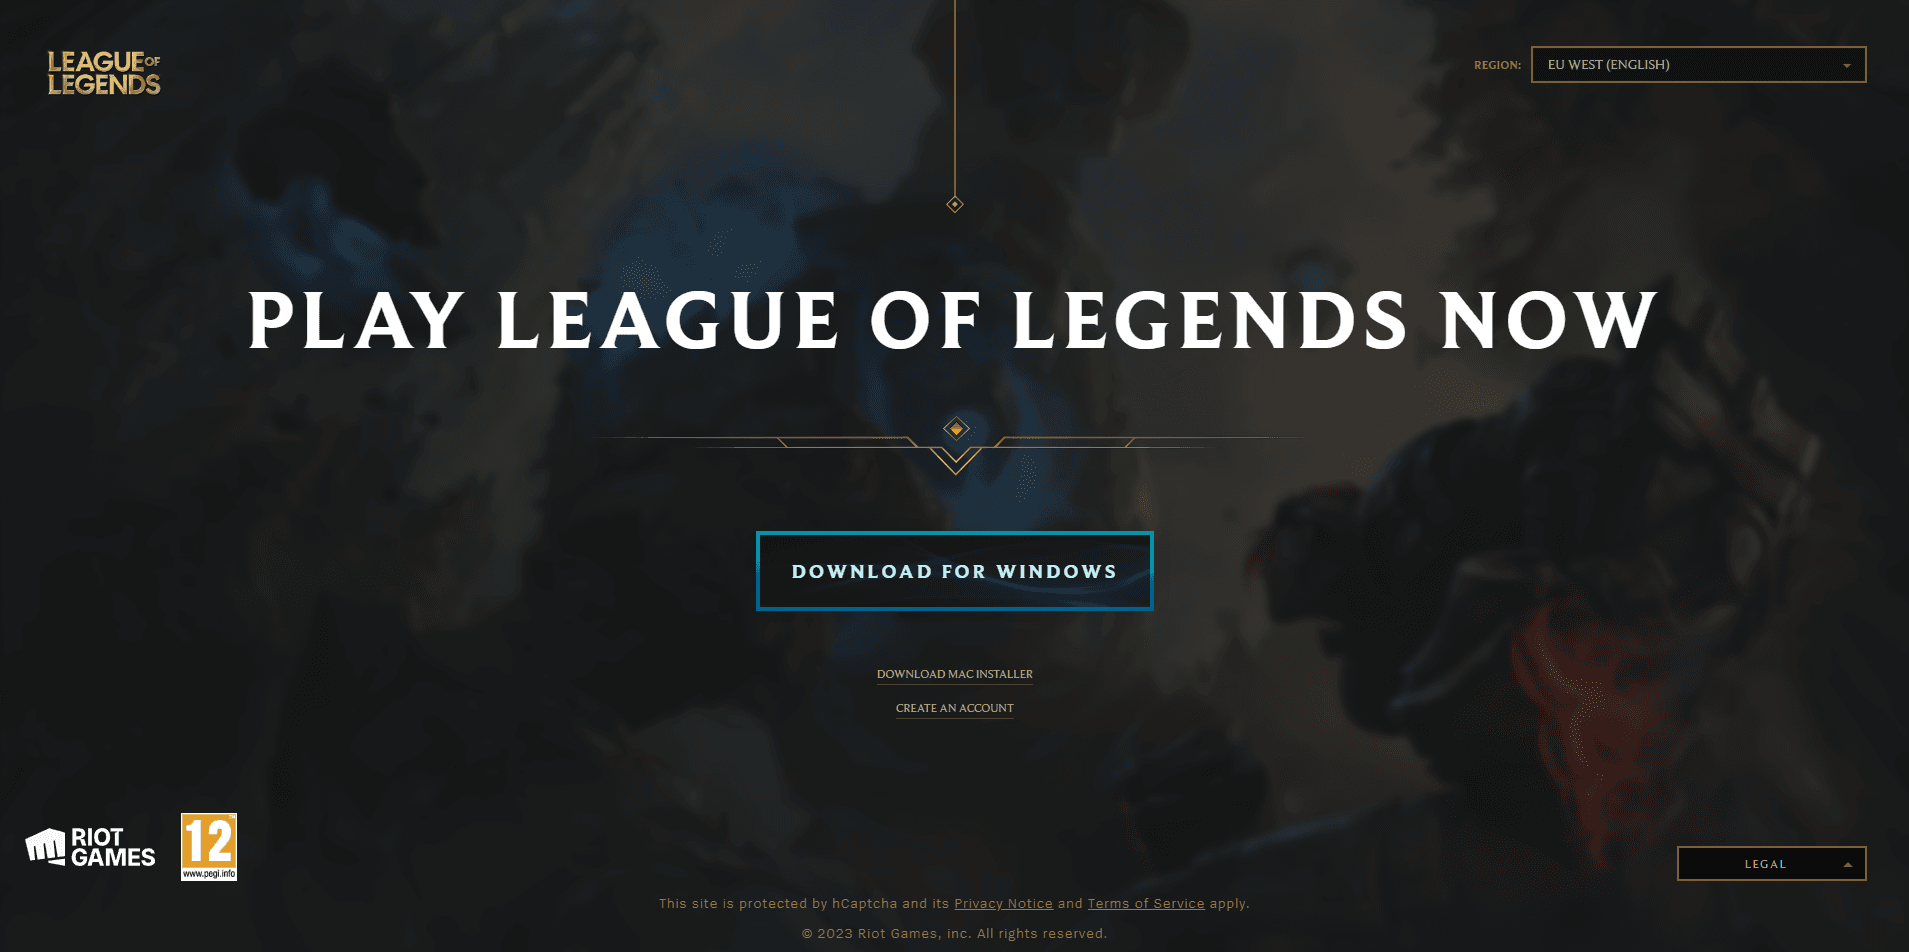 How to Download League of Legends